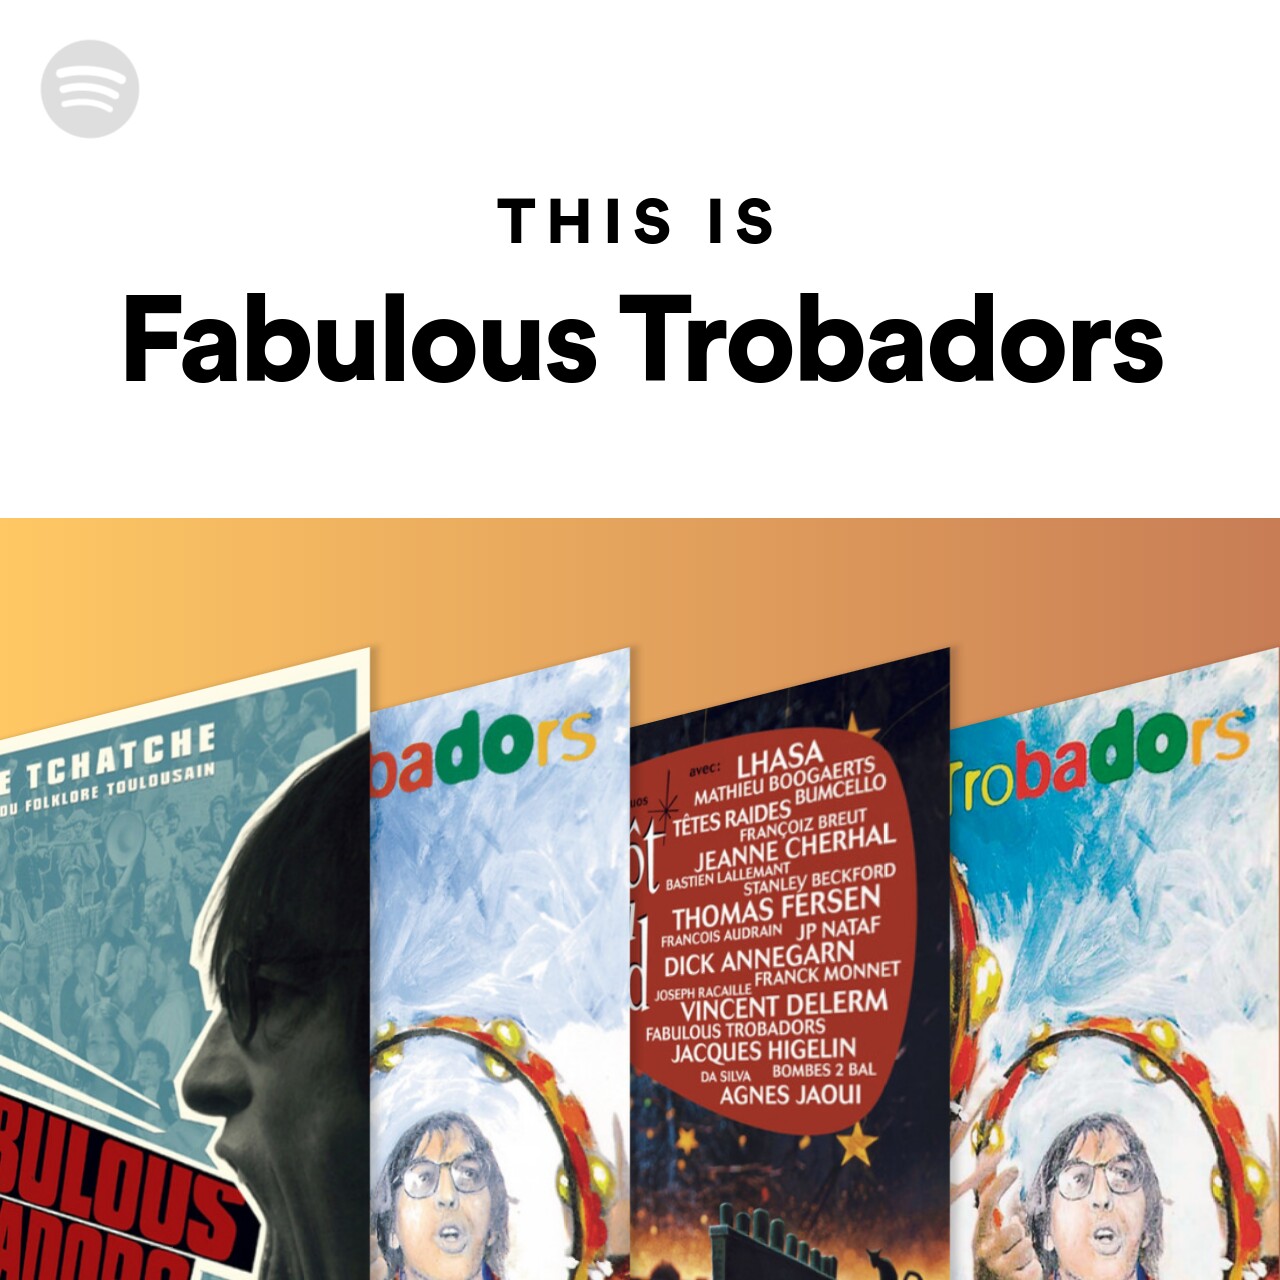 This Is Fabulous Trobadors